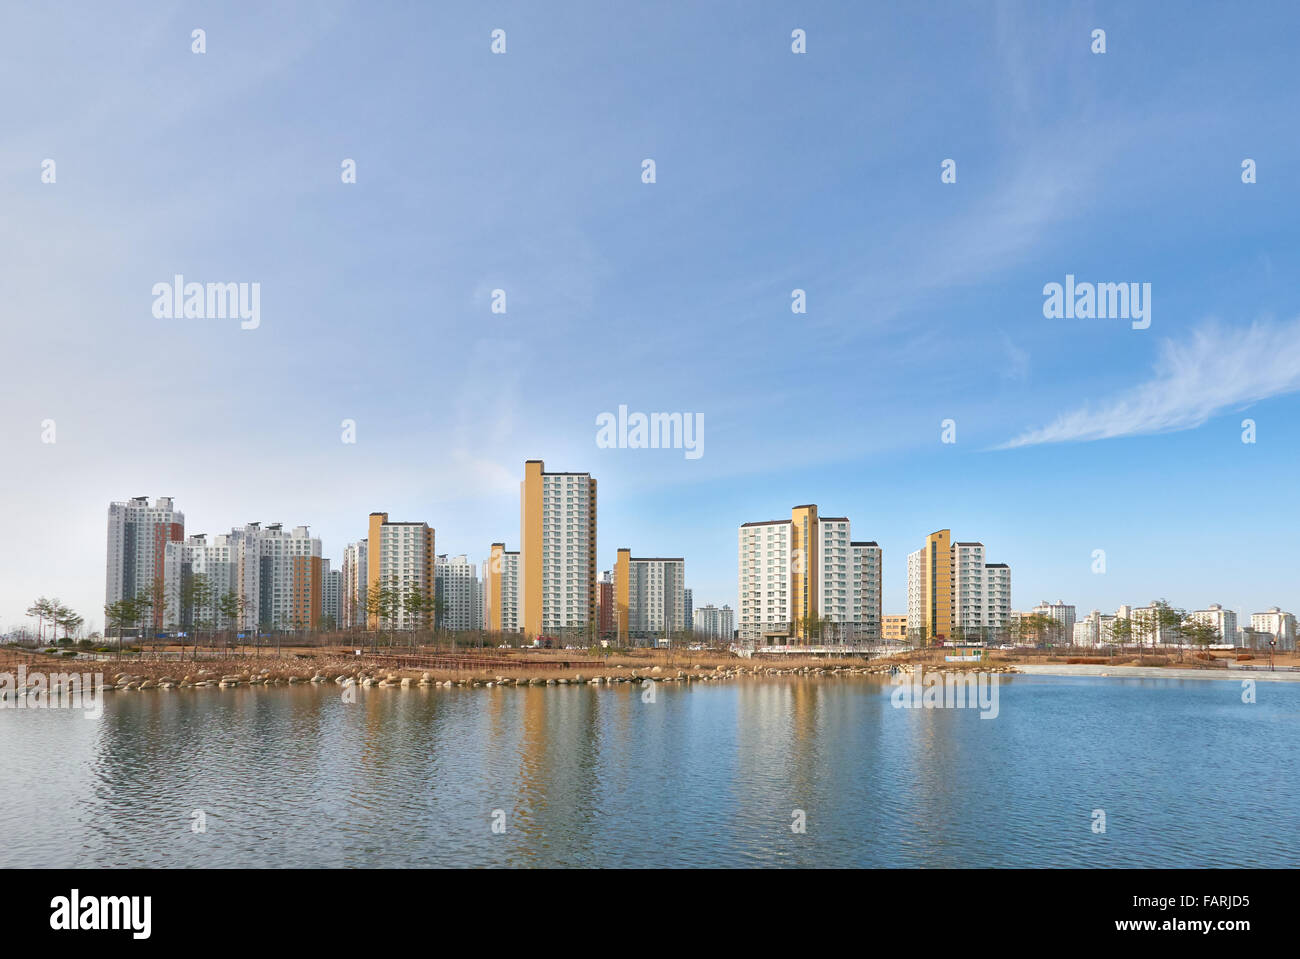 residential buildings and clear lake in a sunny day Stock Photo